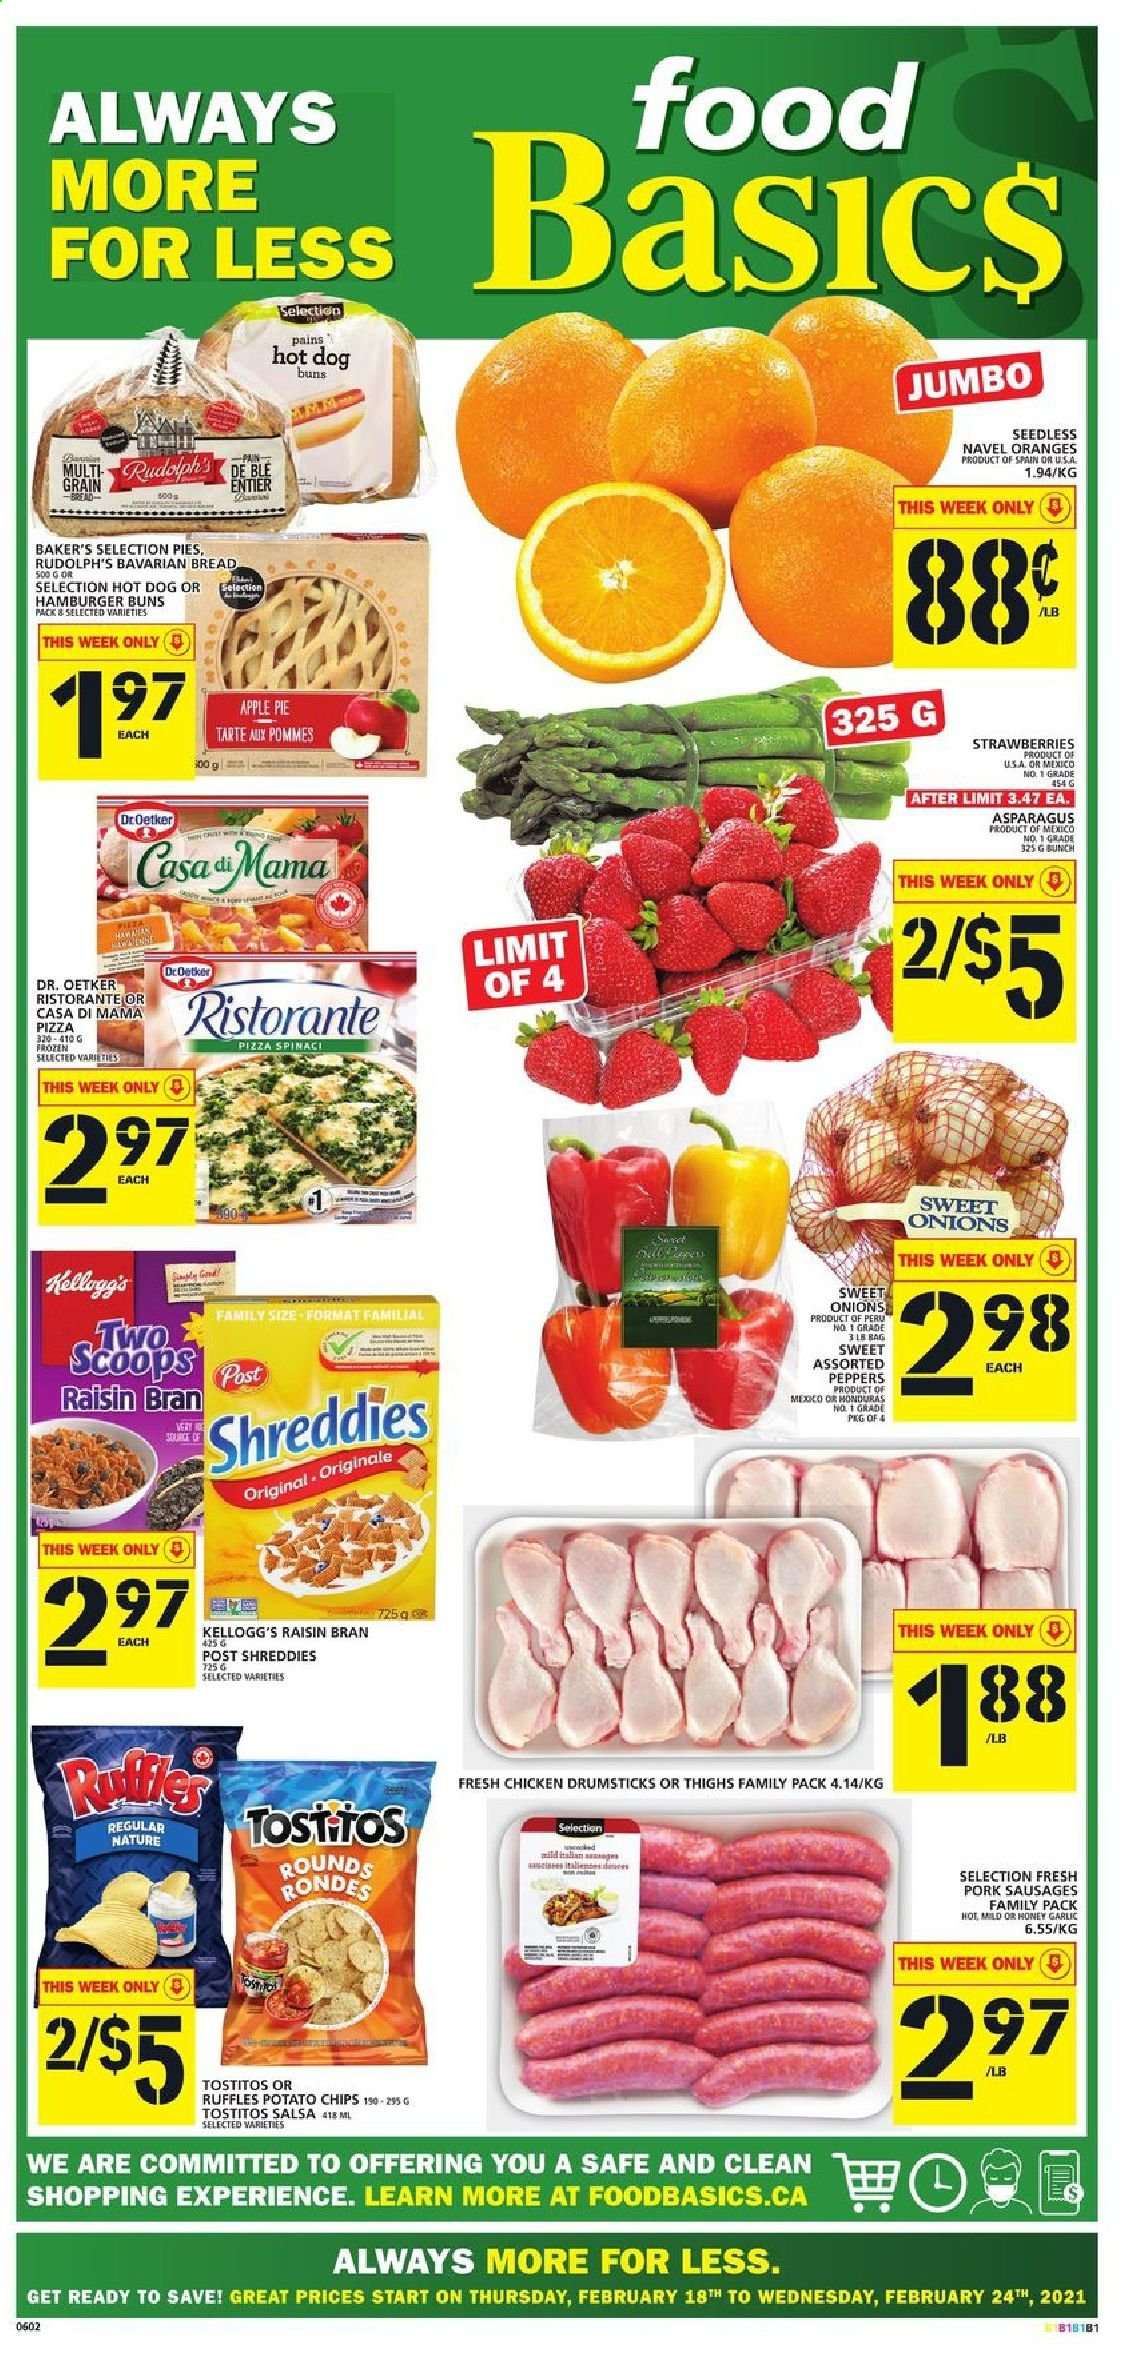 thumbnail - Food Basics Flyer - February 18, 2021 - February 24, 2021 - Sales products - bread, pie, buns, burger buns, apple pie, asparagus, garlic, peppers, strawberries, navel oranges, pizza, sausage, Dr. Oetker, Kellogg's, potato chips, Ruffles, Tostitos, Raisin Bran, salsa, chicken drumsticks, chicken, chips. Page 1.